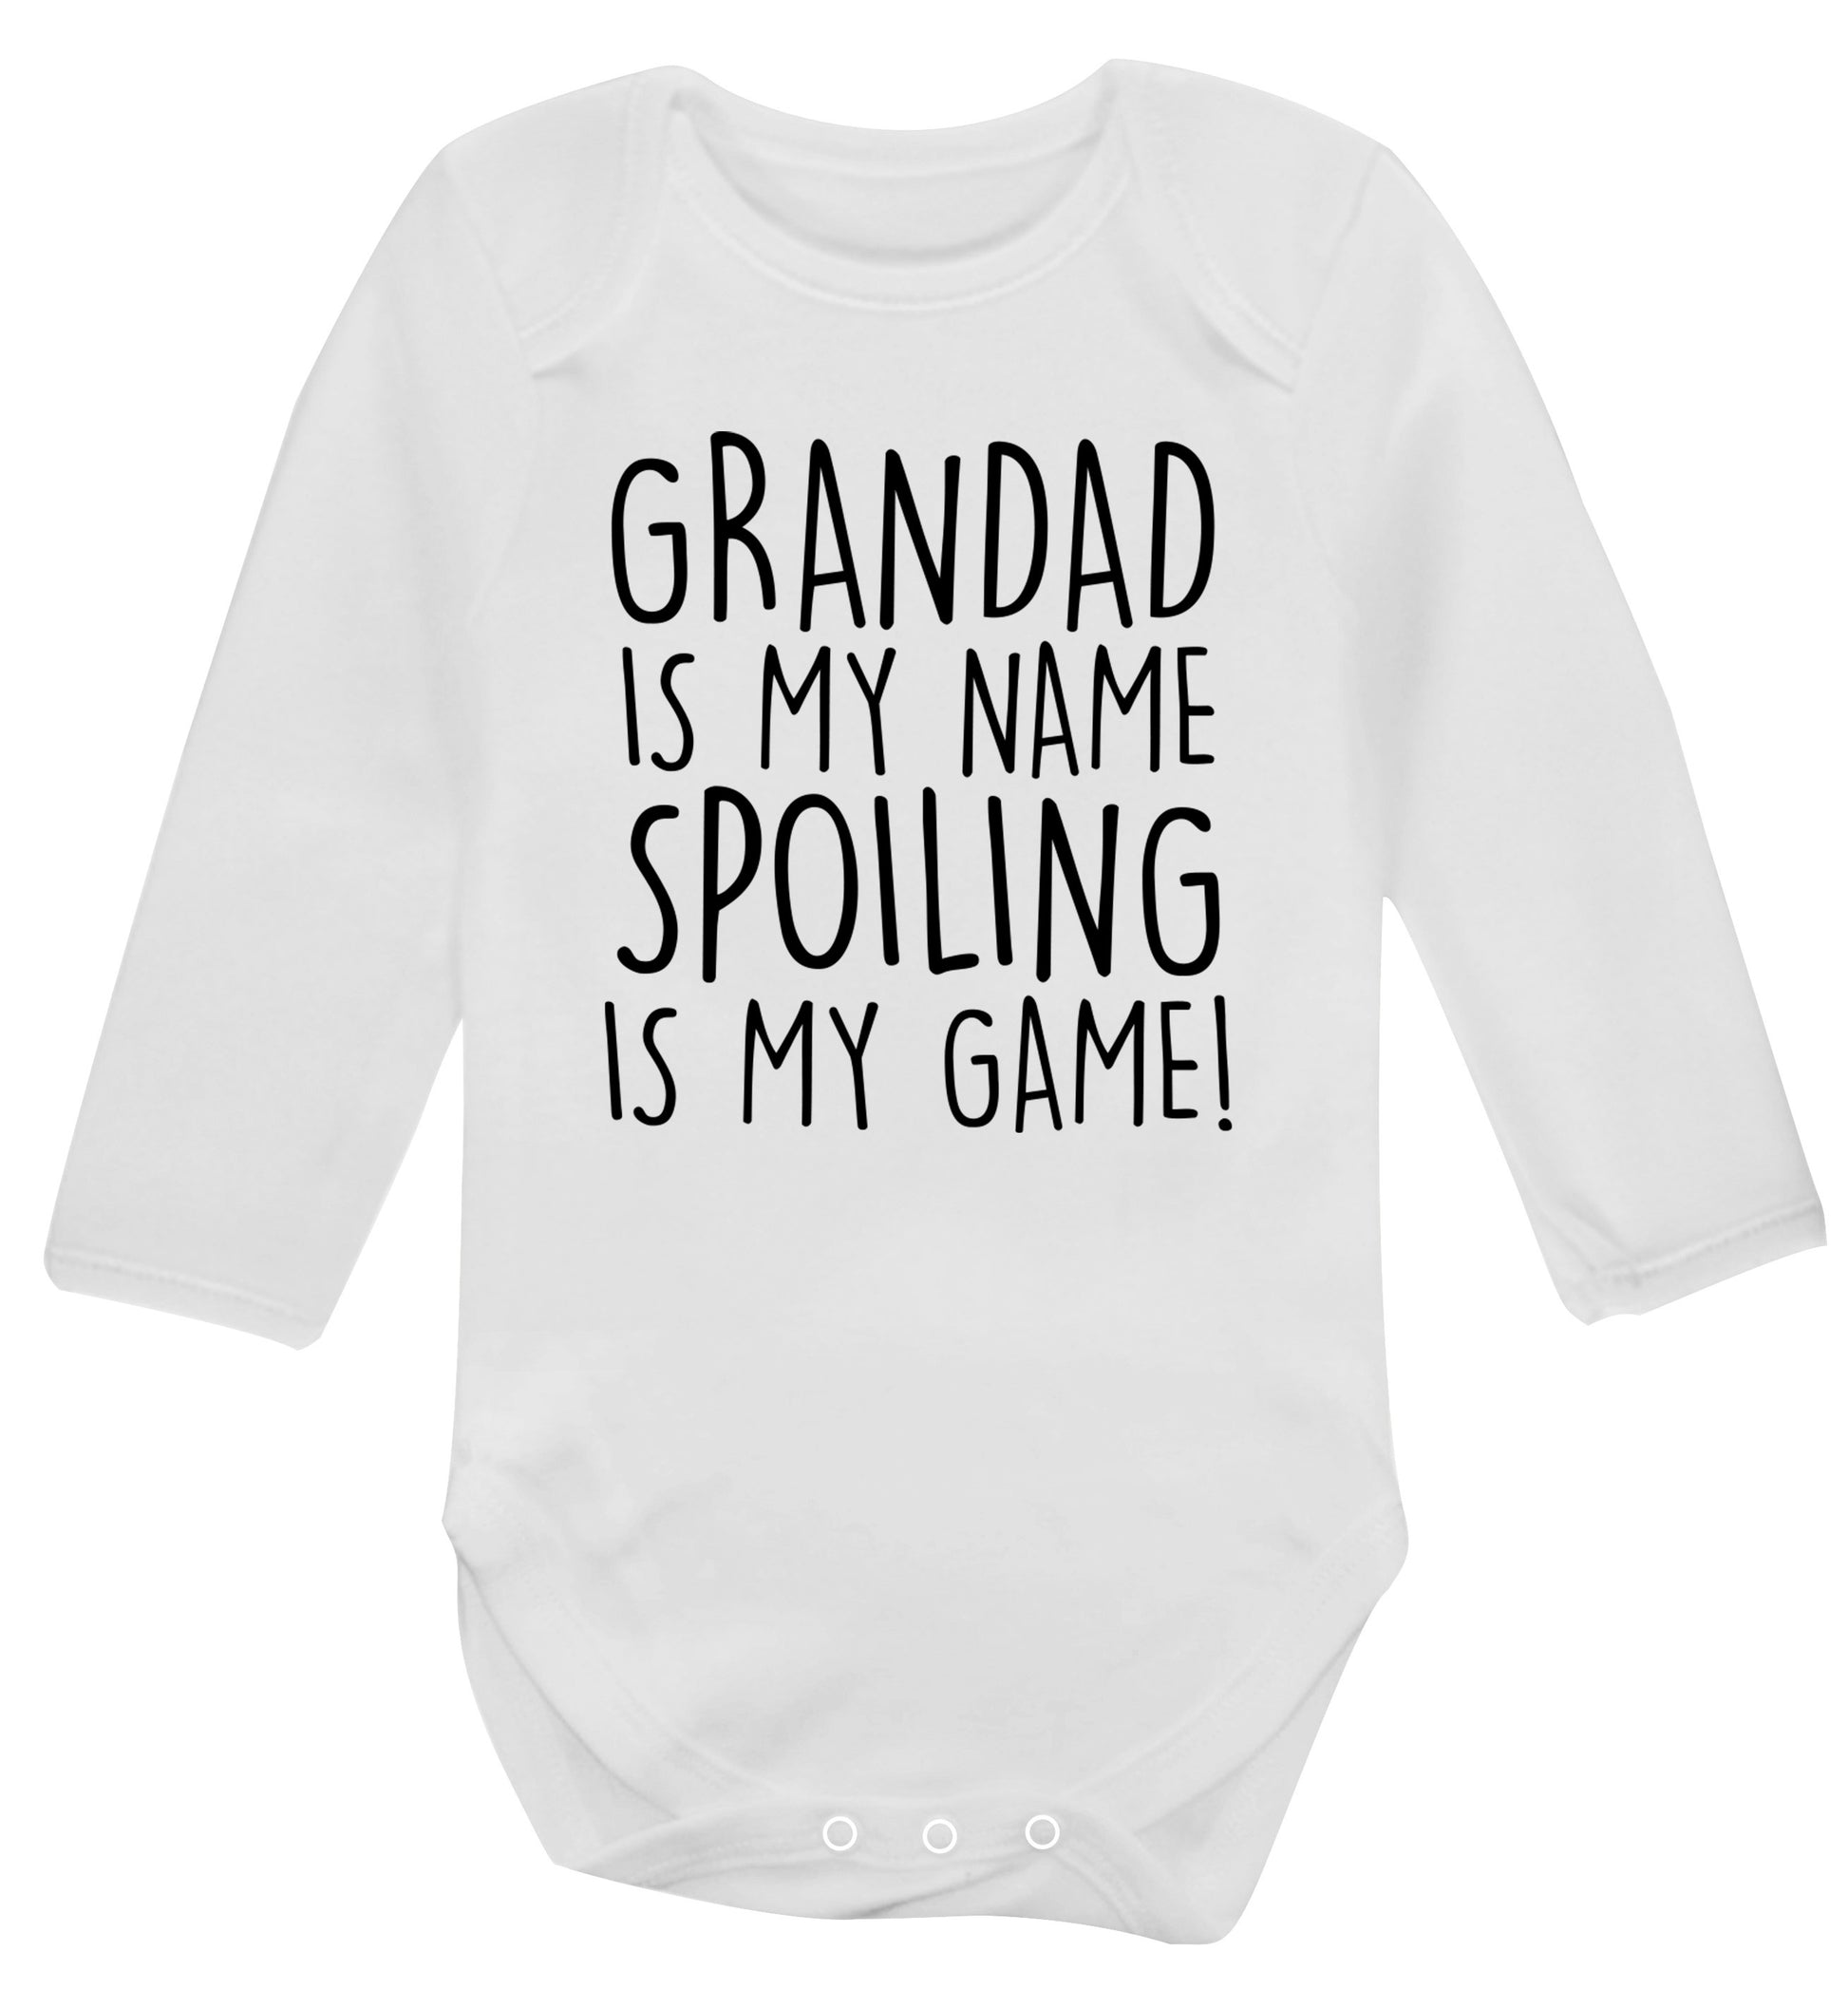 Grandad is my name, spoiling is my game Baby Vest long sleeved white 6-12 months